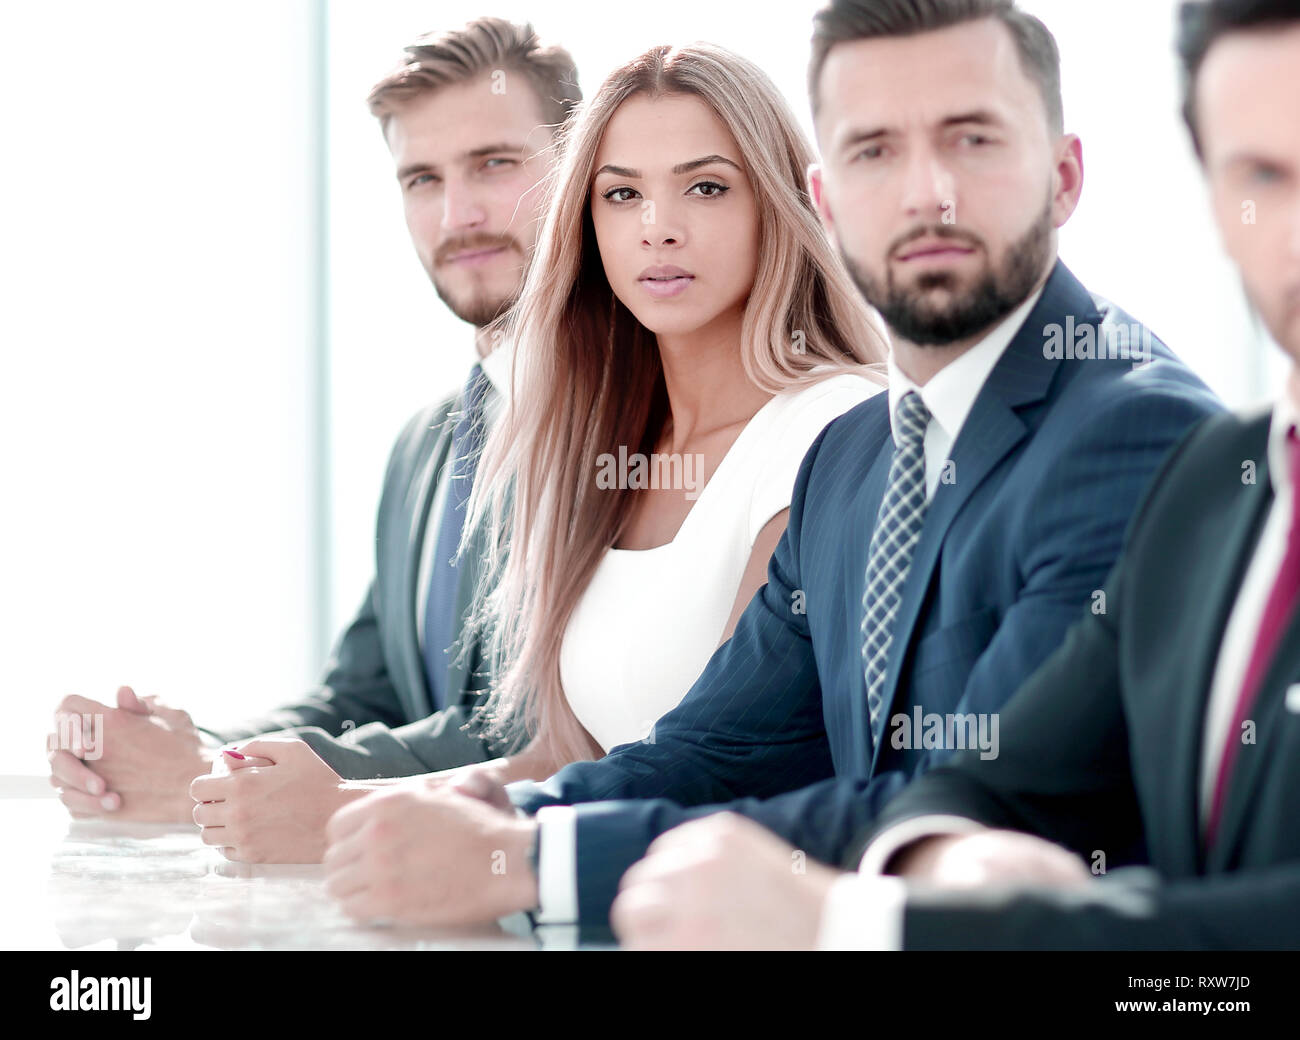 business group sitting at the negotiating table Stock Photo